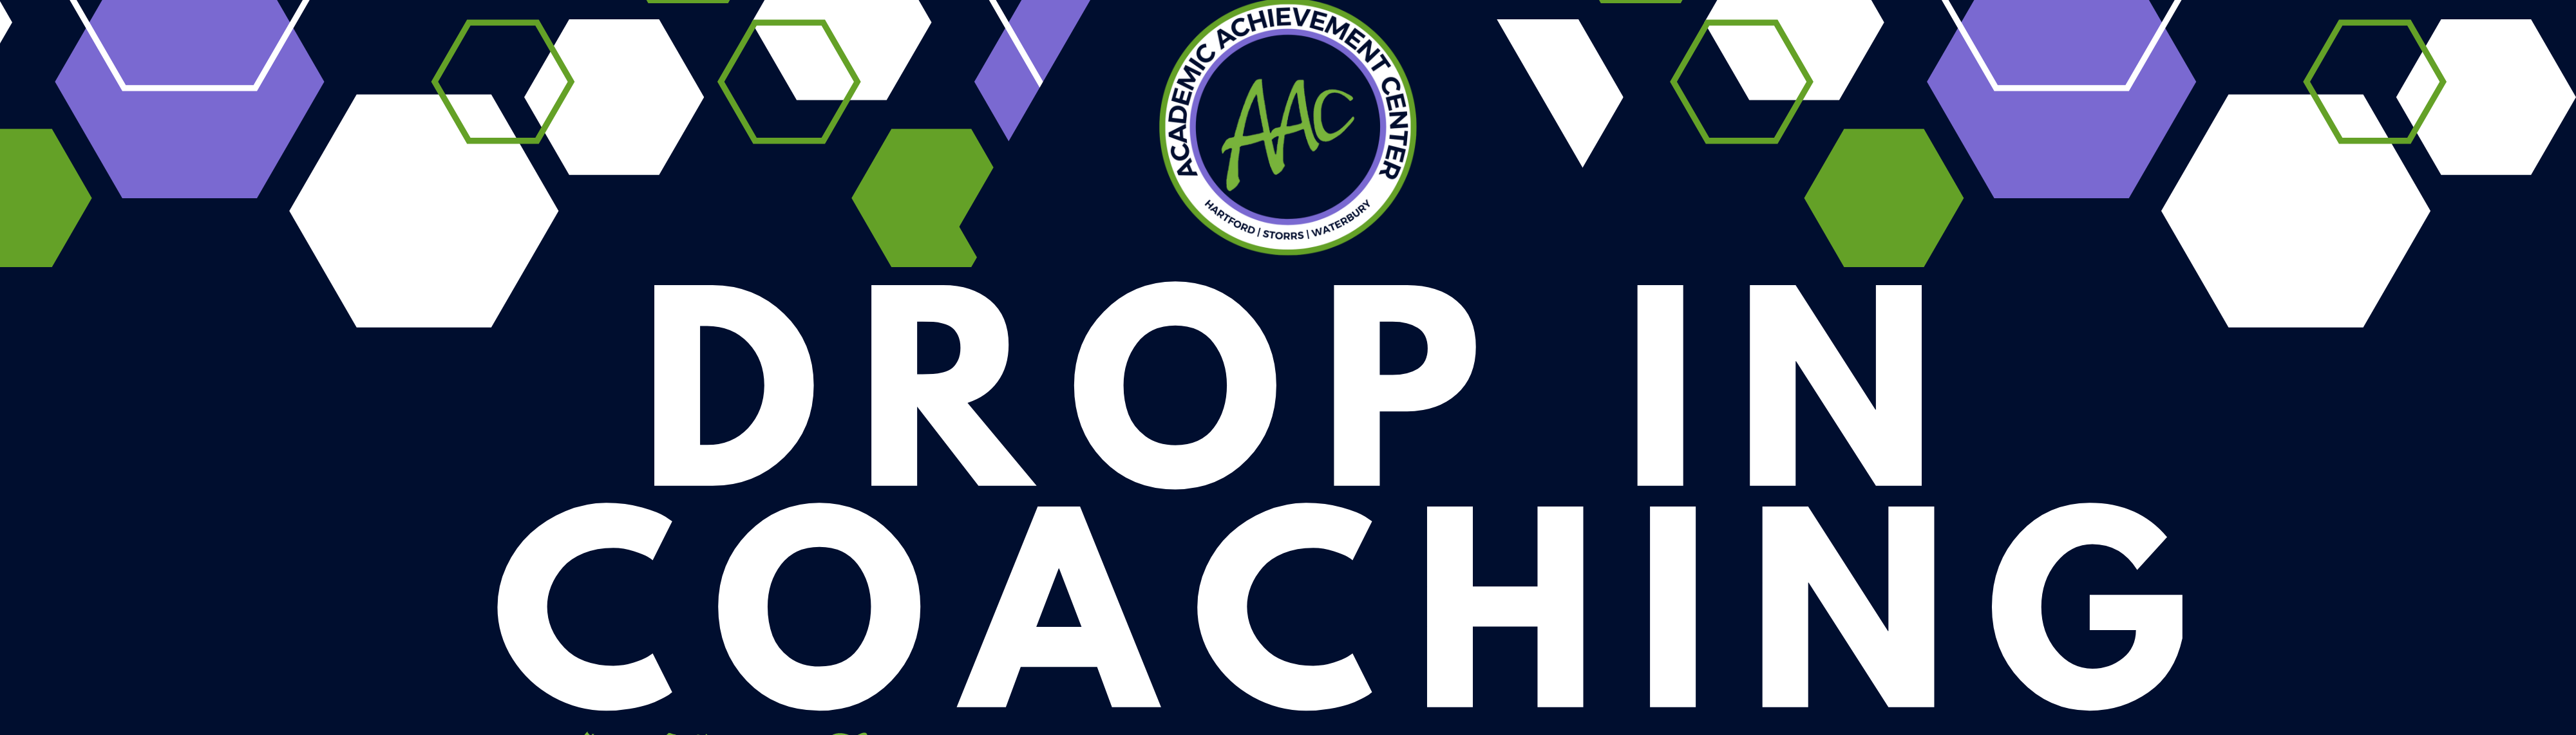 Graphic designed with a hexagon pattern and the AAC logo which labels Storrs, Hartford, and Waterbury. The text reads "Drop in Coaching"